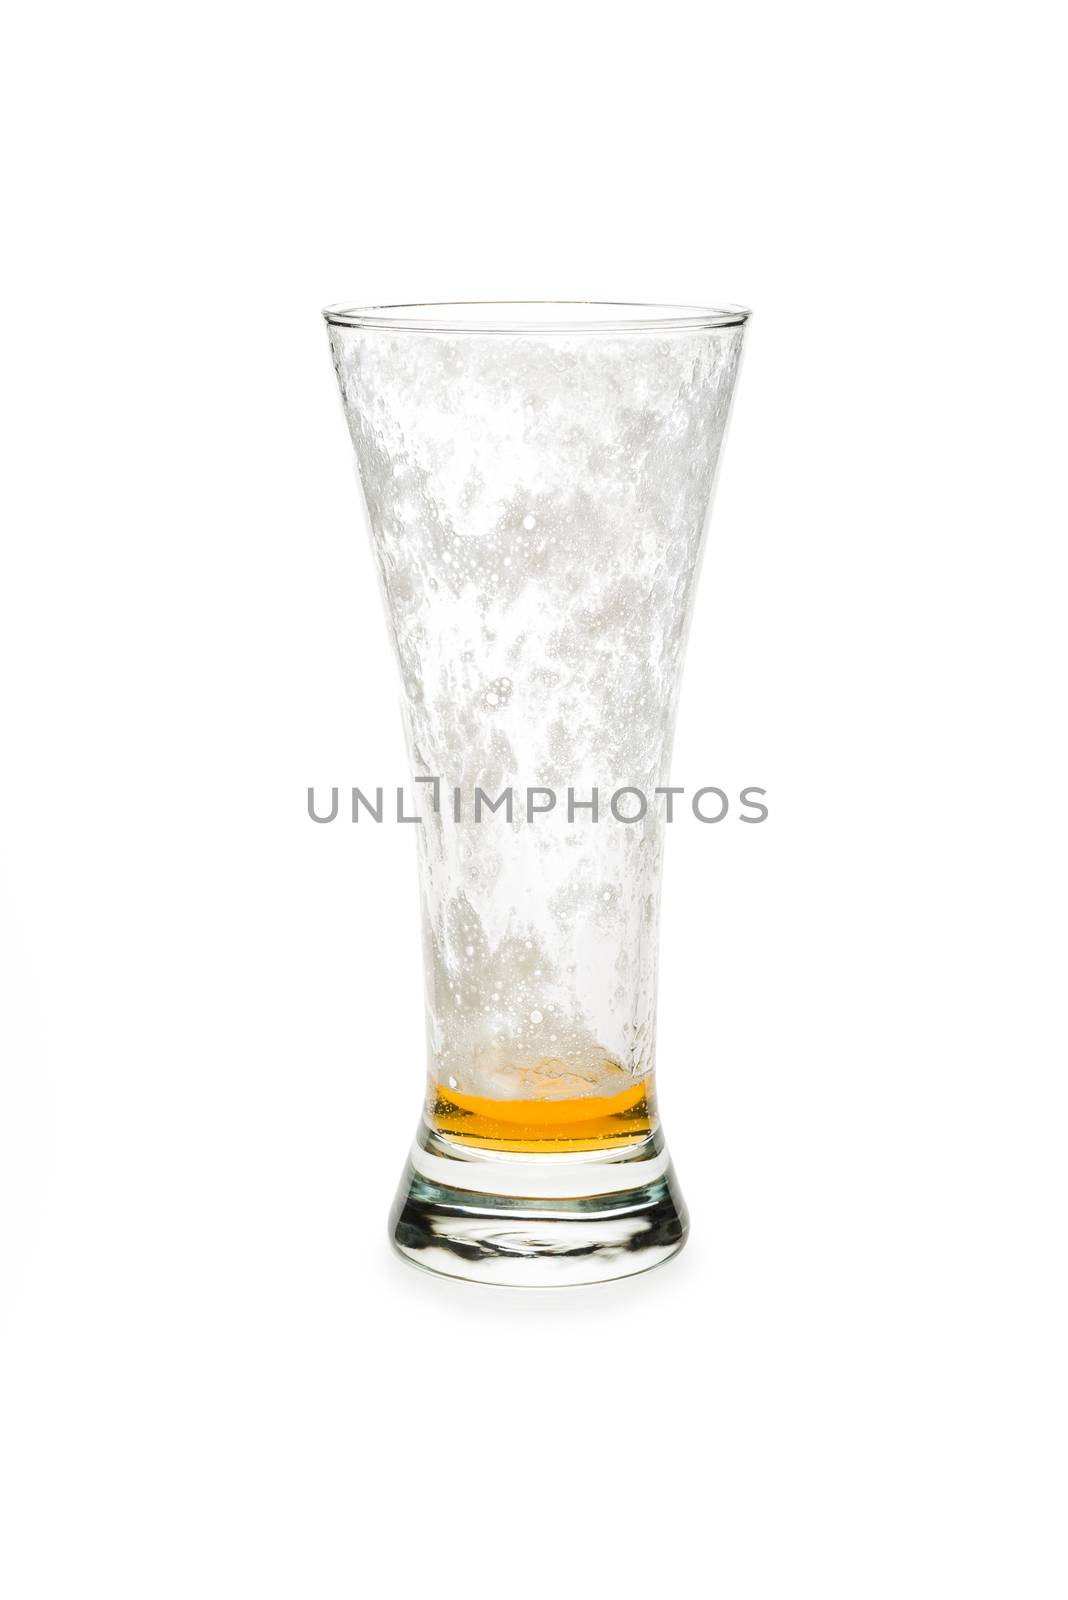 Almost empty pilsner beer glass isolated against white background.